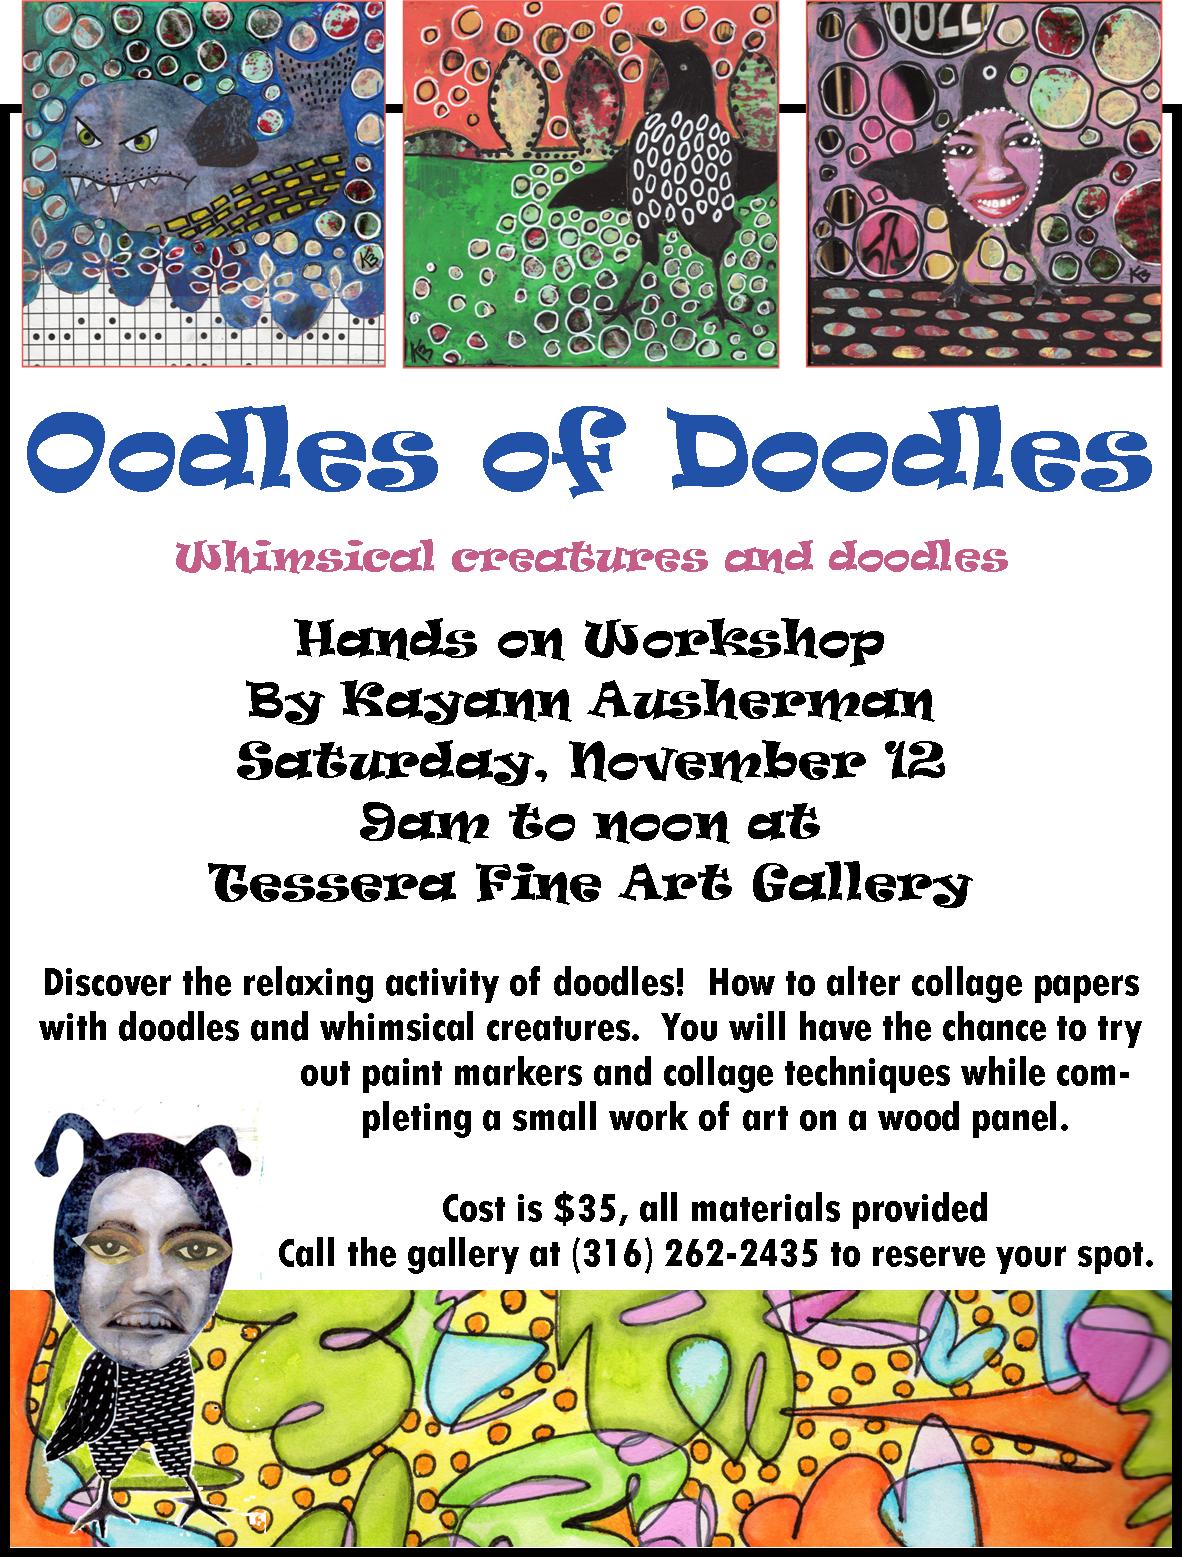 oodles-of-doodles